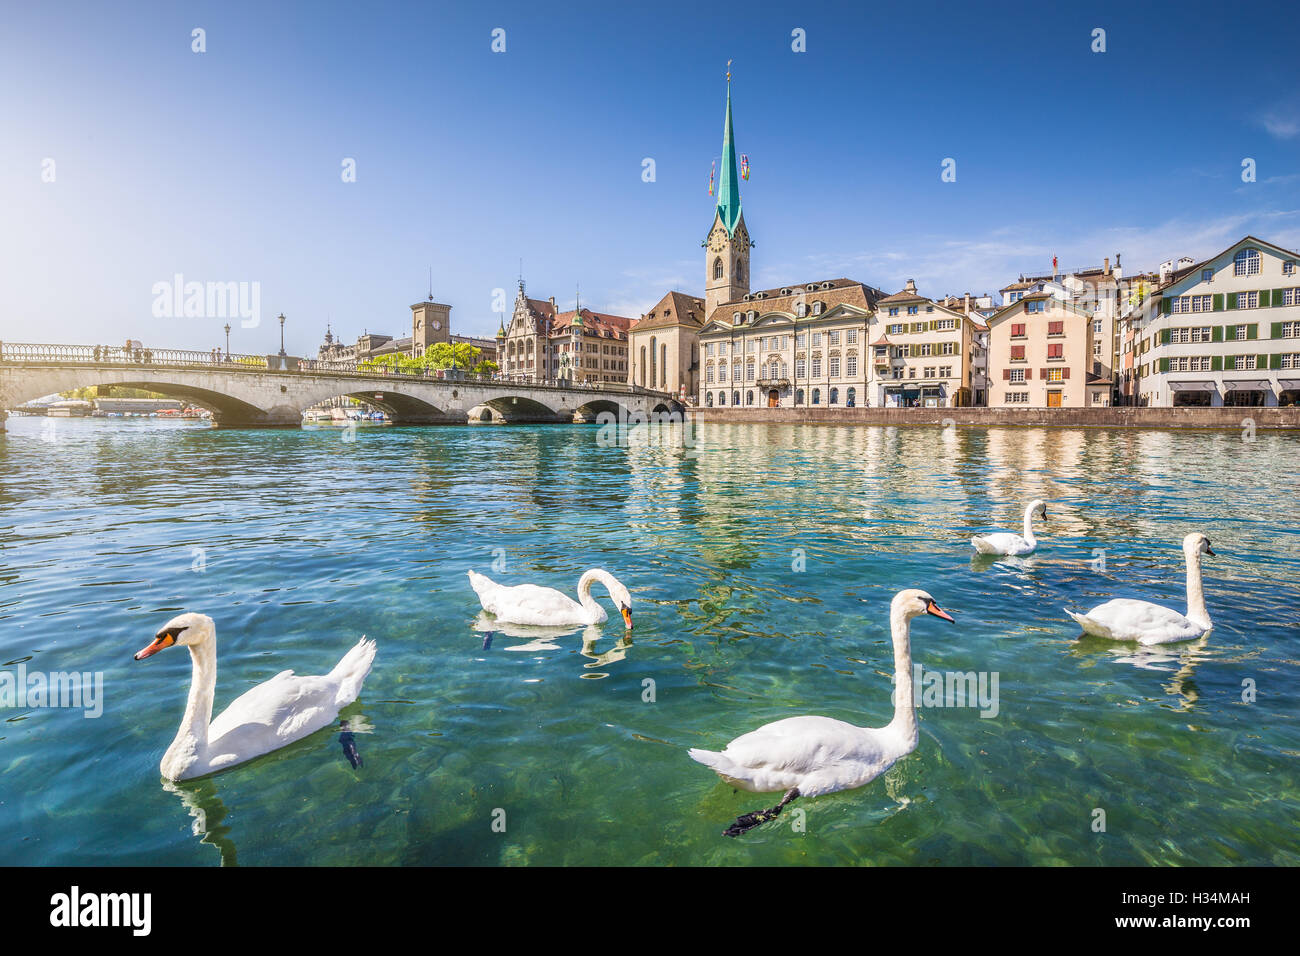 Historic city center of Zurich with famous Fraumunster Church and swans on river Limmat, Canton of Zurich, Switzerland Stock Photo